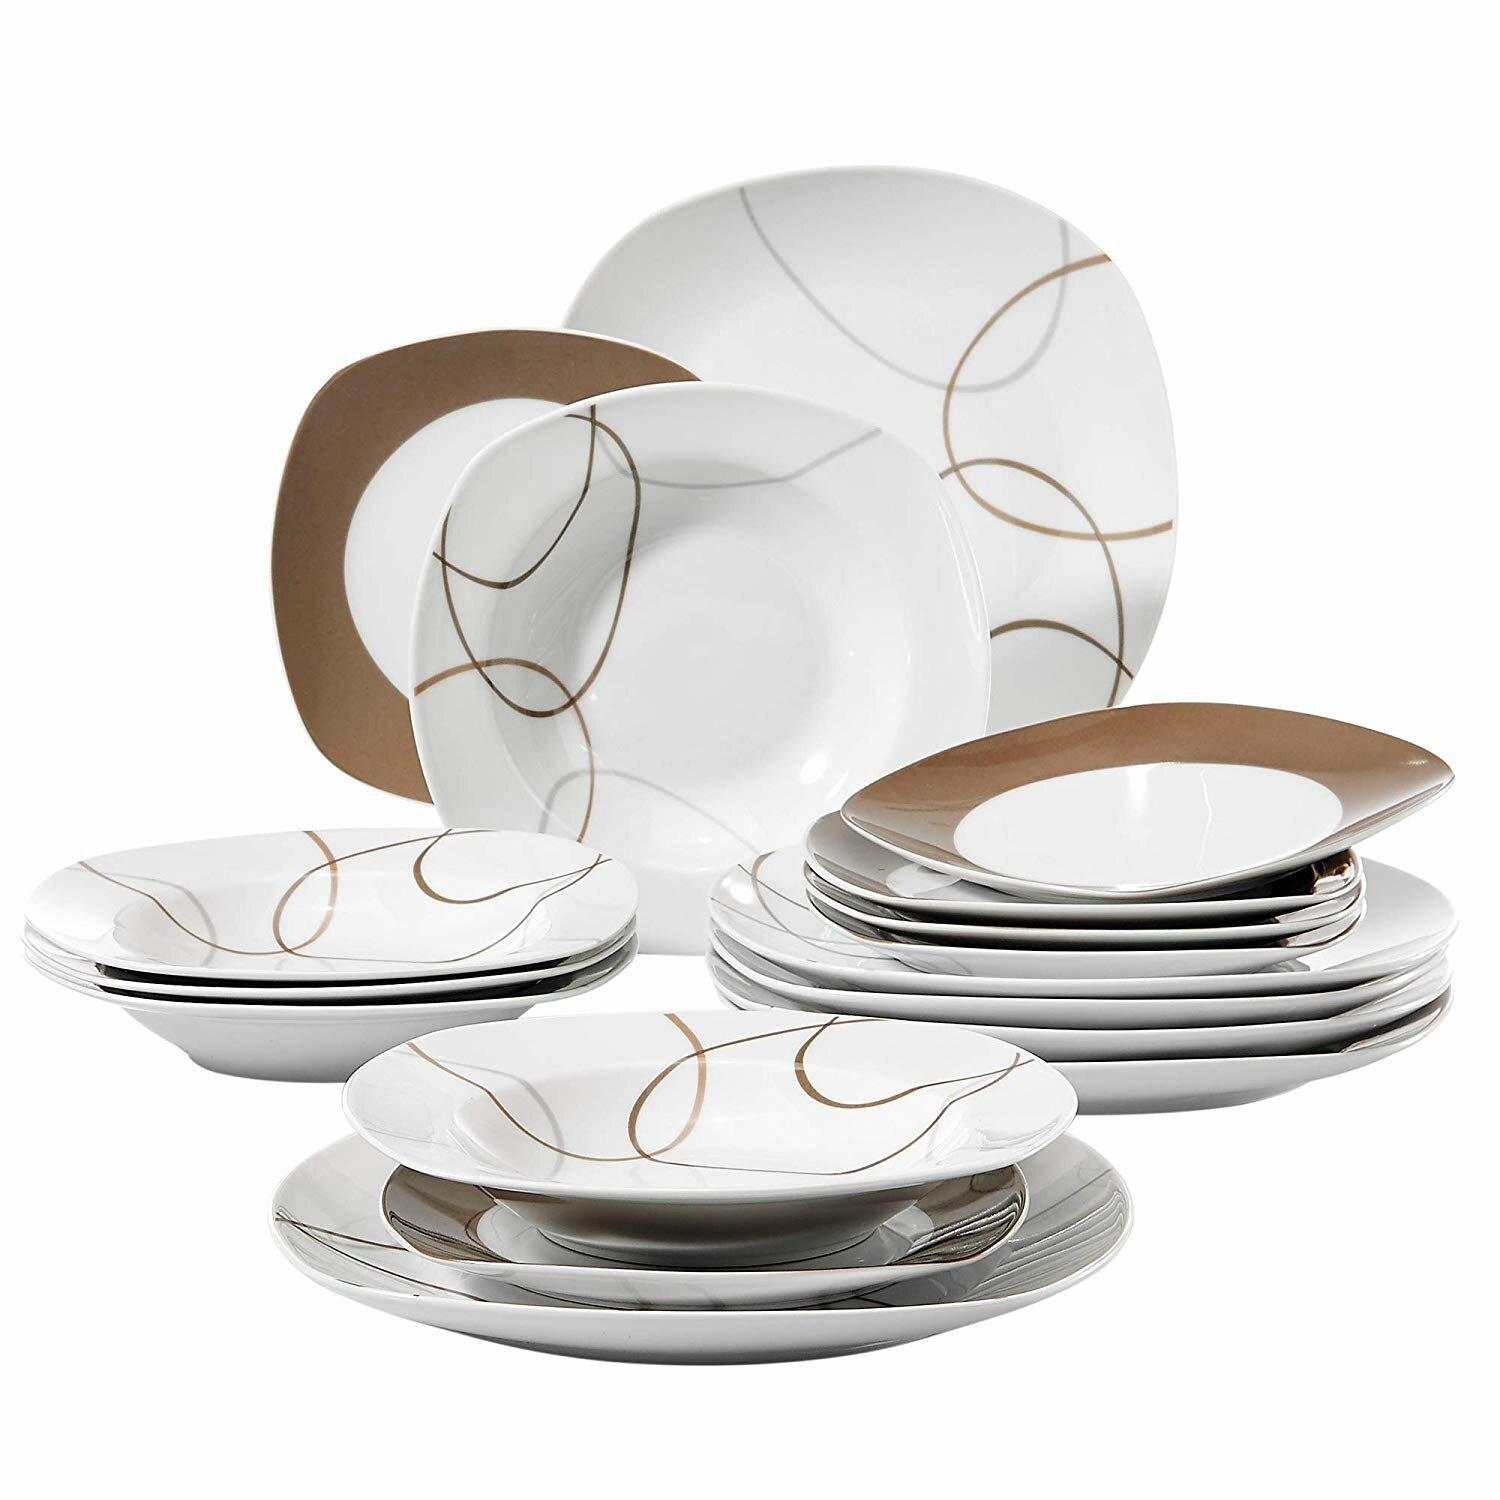 MALACASA Series Elisa 36-Piece Dinner Sets Ivory White Porcelain Dinner Plate Sets with 12-Piece Dinner Plates 12-Piece Soup Plates and 12-Piece Dessert Plates Service for 12